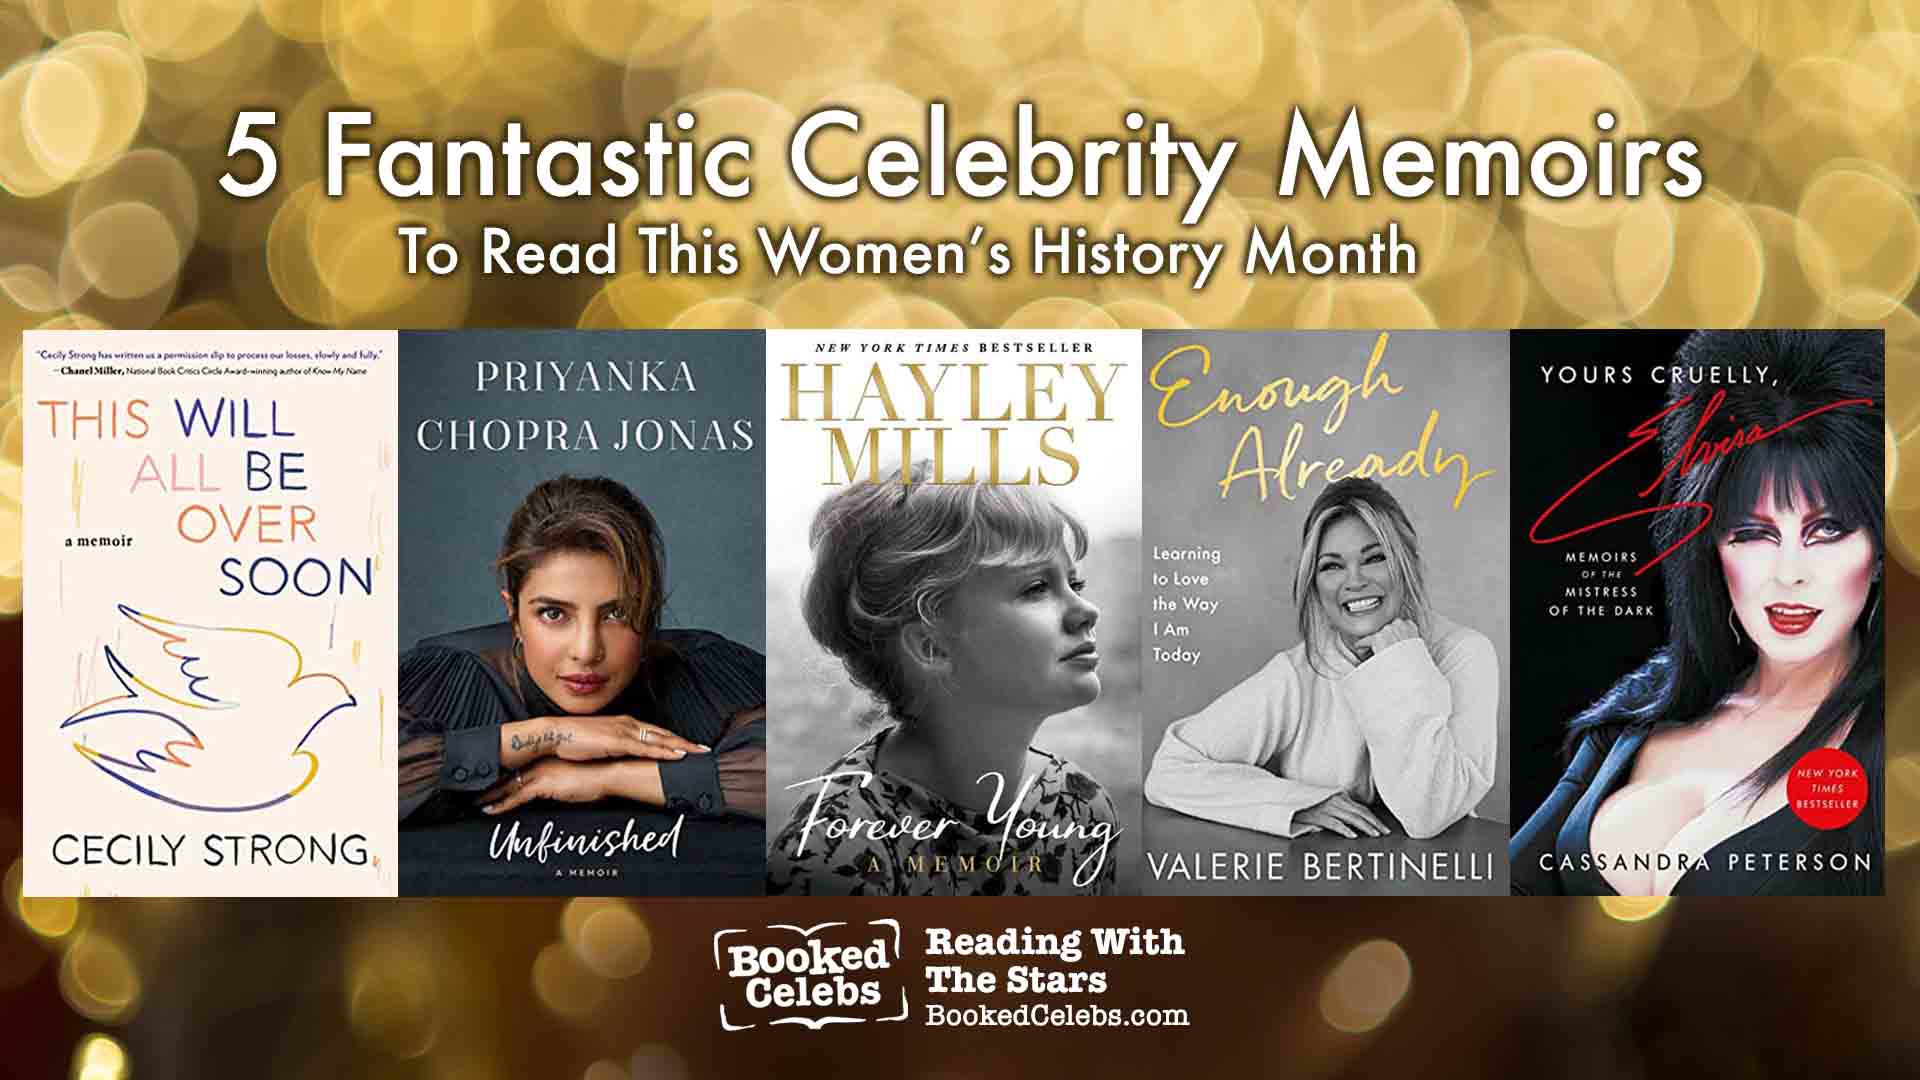 Five Fantastic Celebrity Memoirs to Read This Women’s History Month